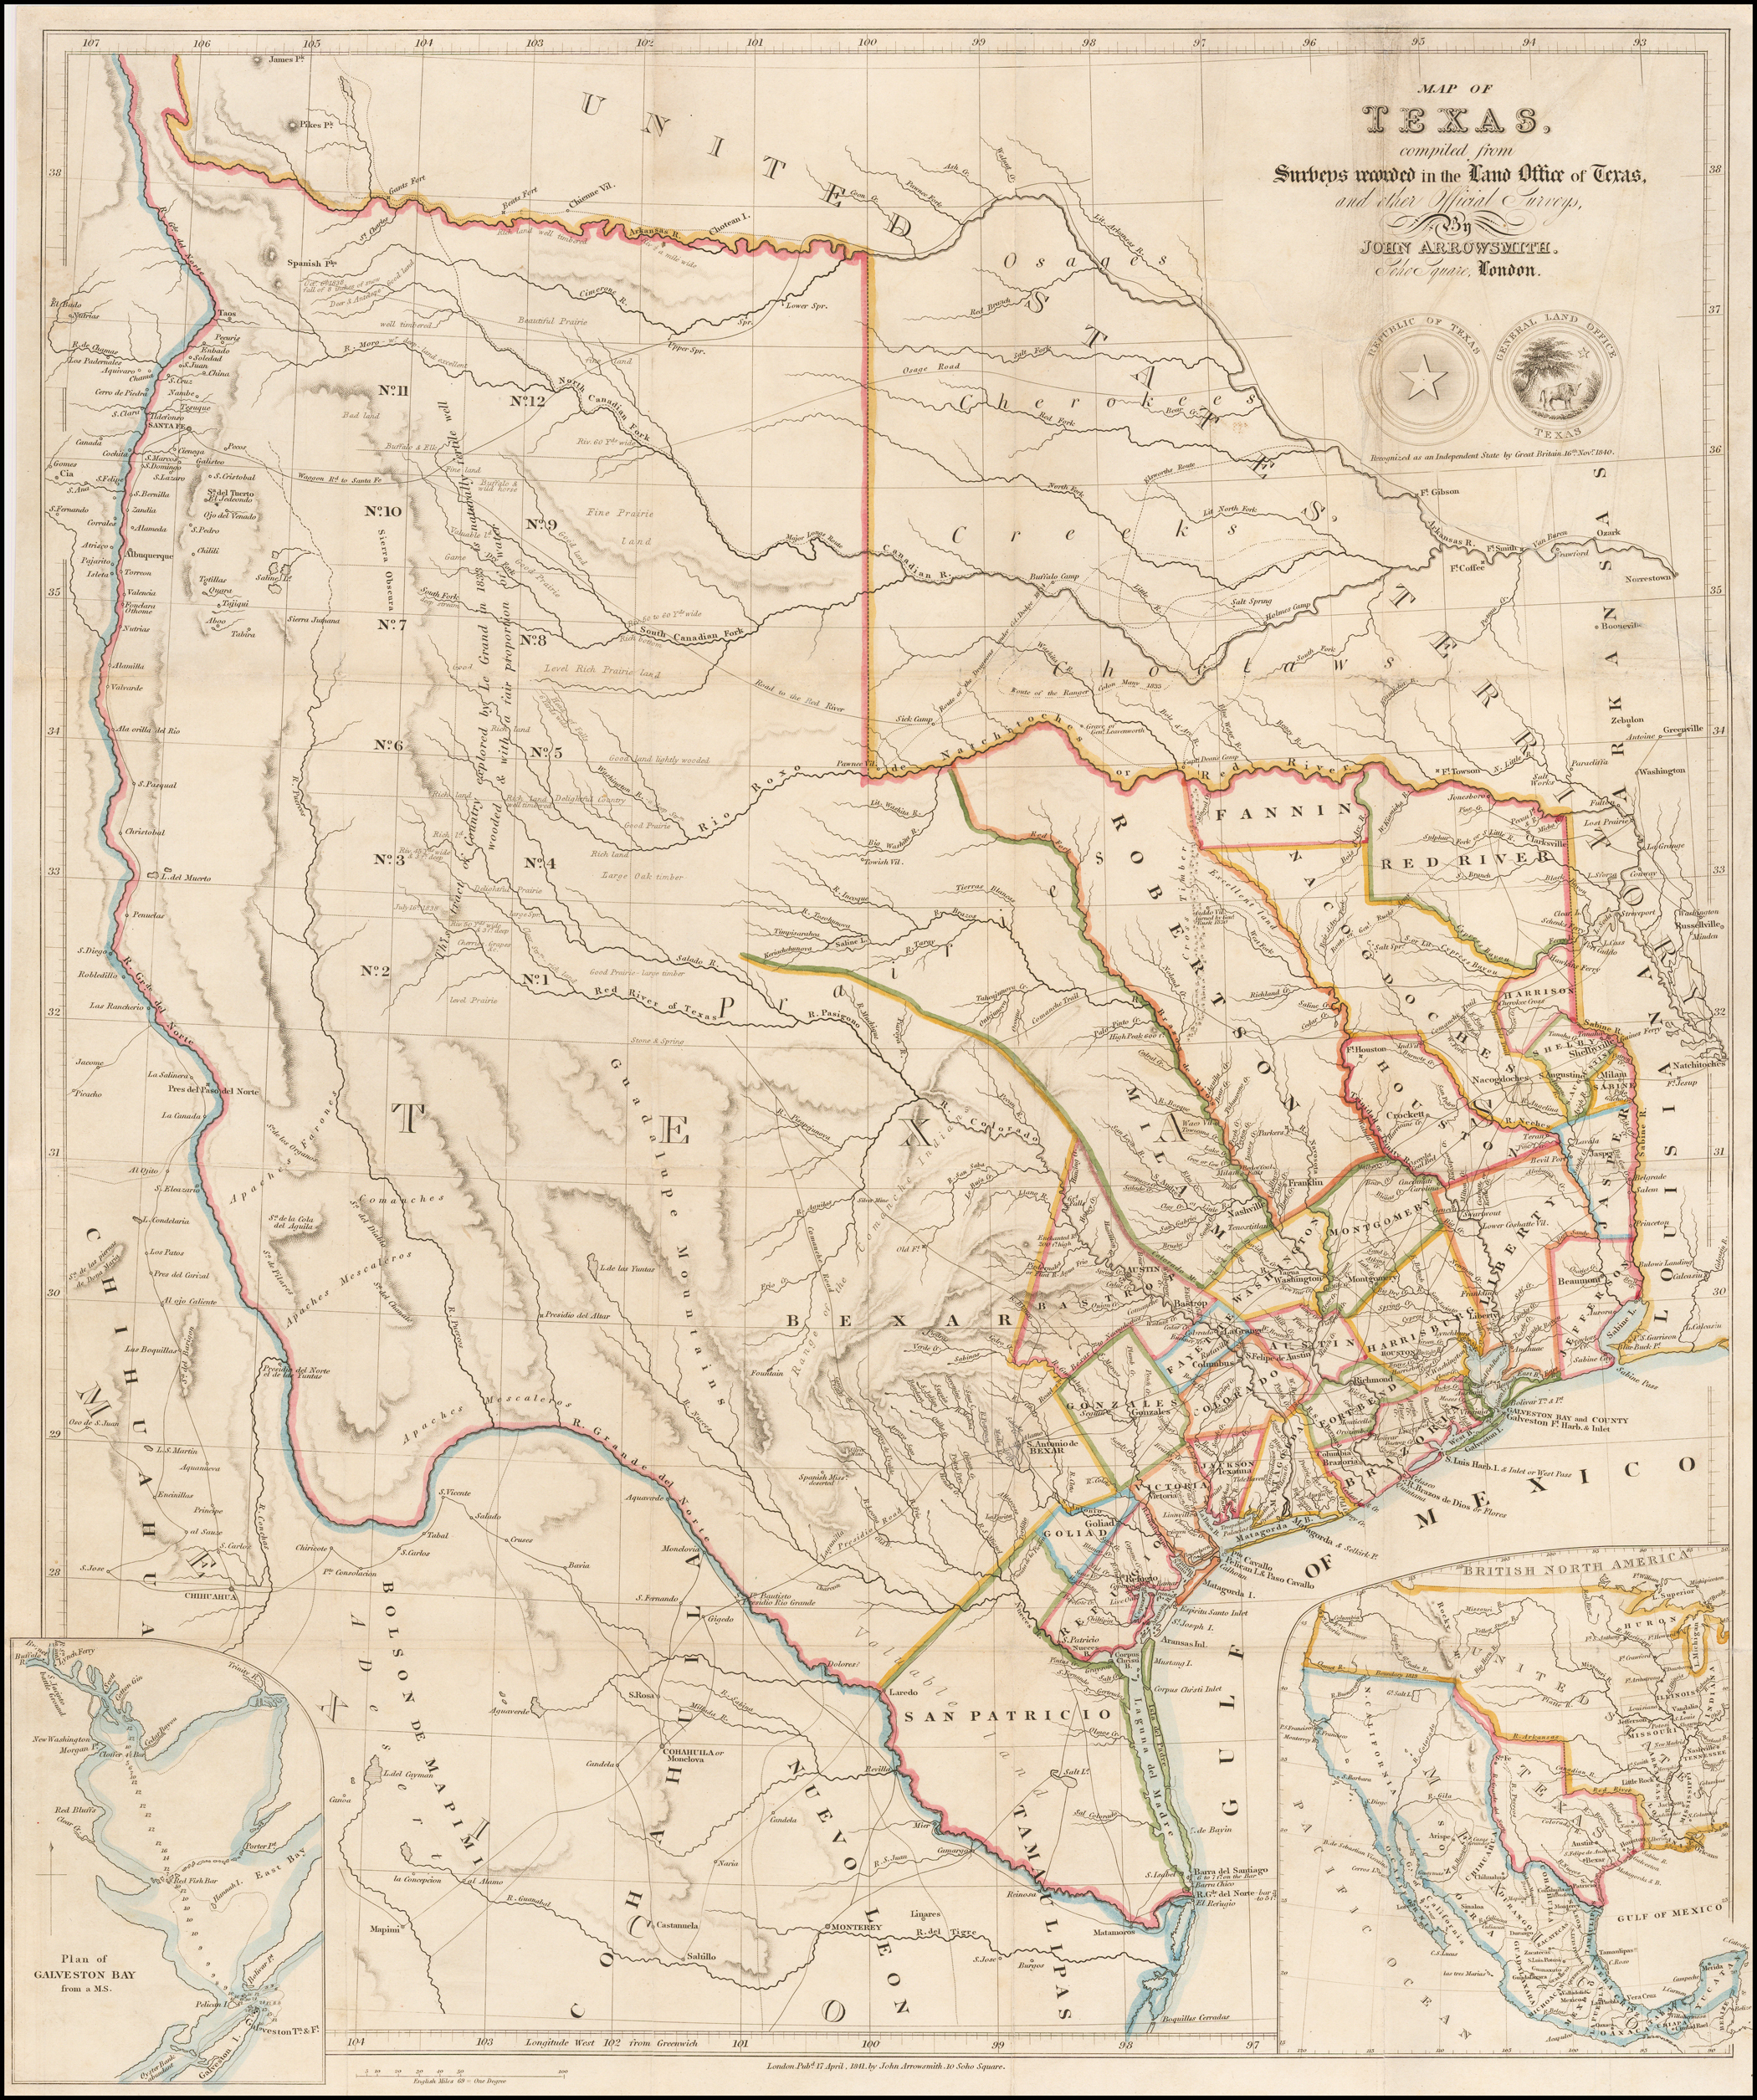 A Map Of Texas, Compiled From Surveys Recorded In The Land Office Of - Texas Land Office Maps